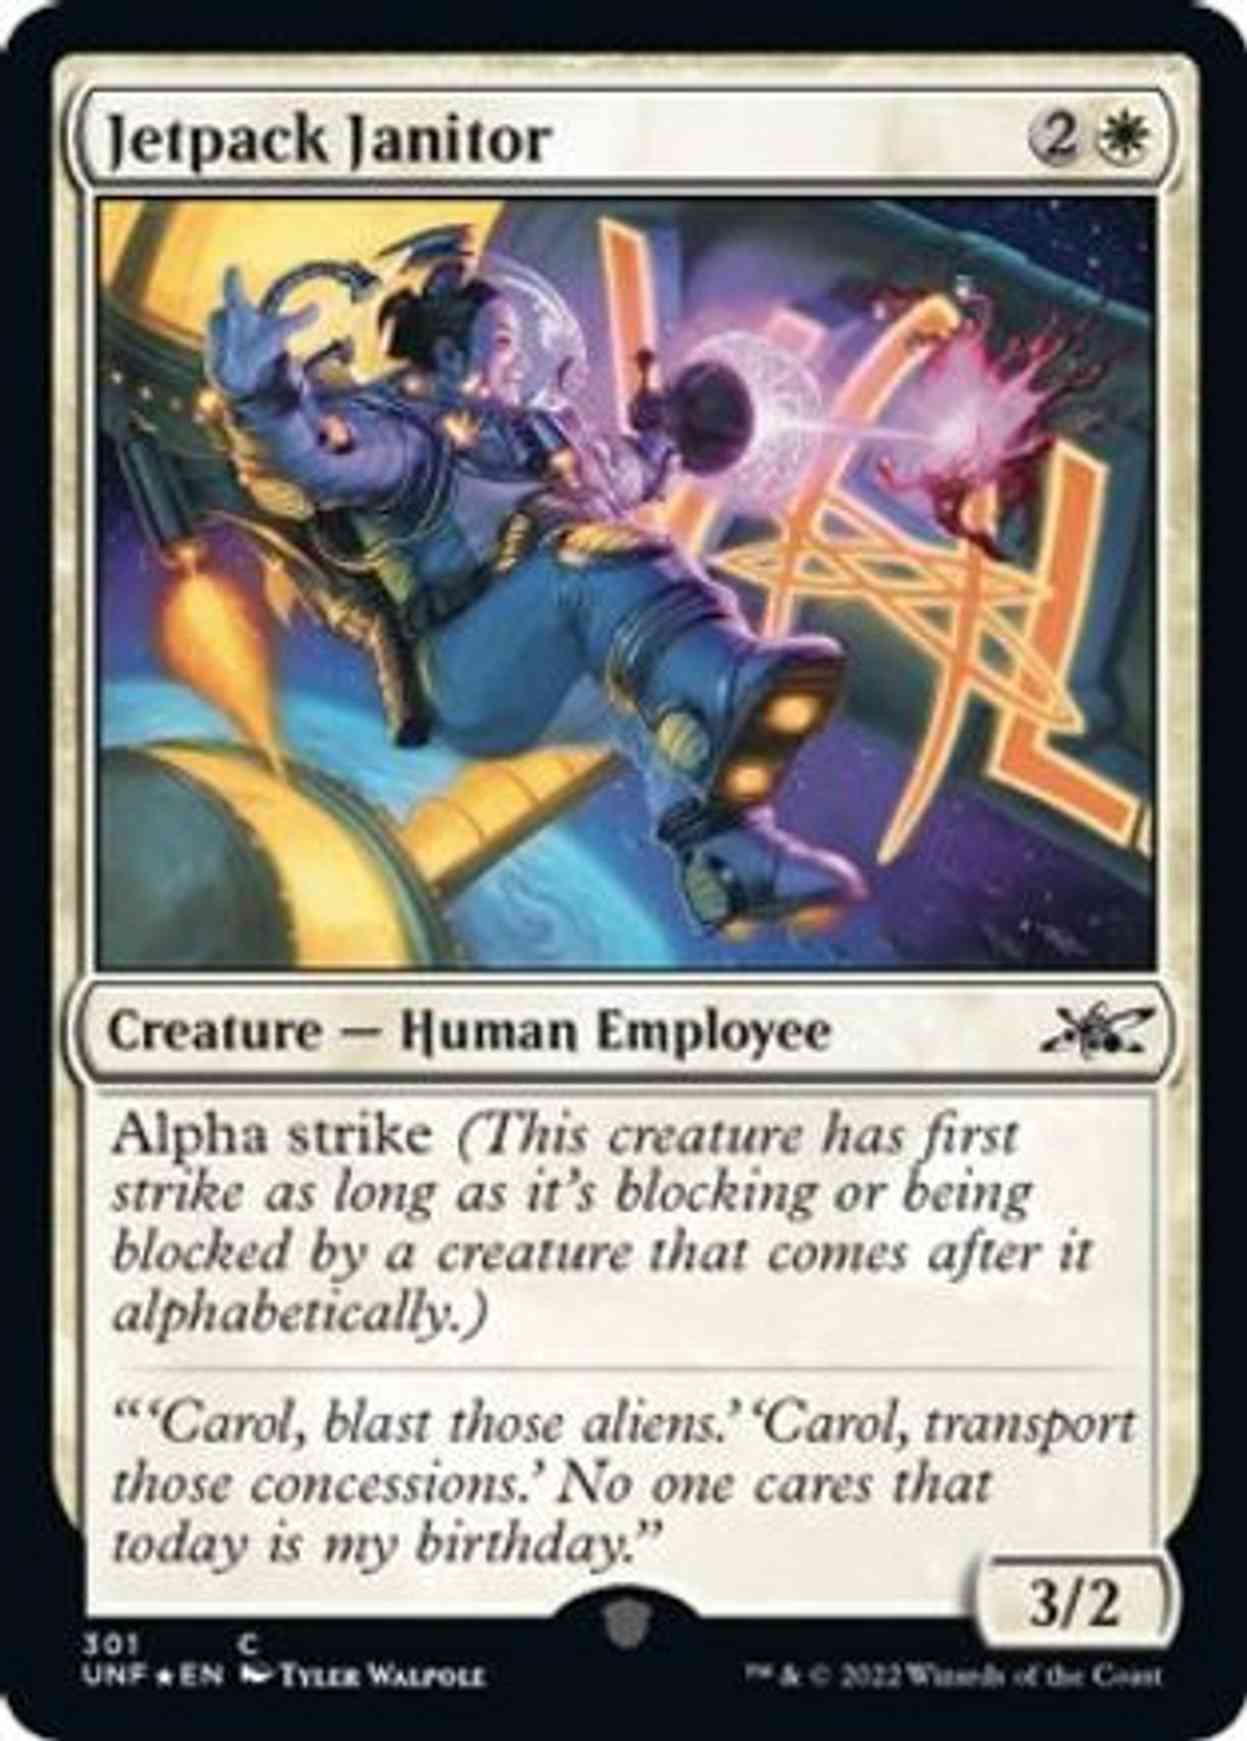 Jetpack Janitor (Galaxy Foil) magic card front